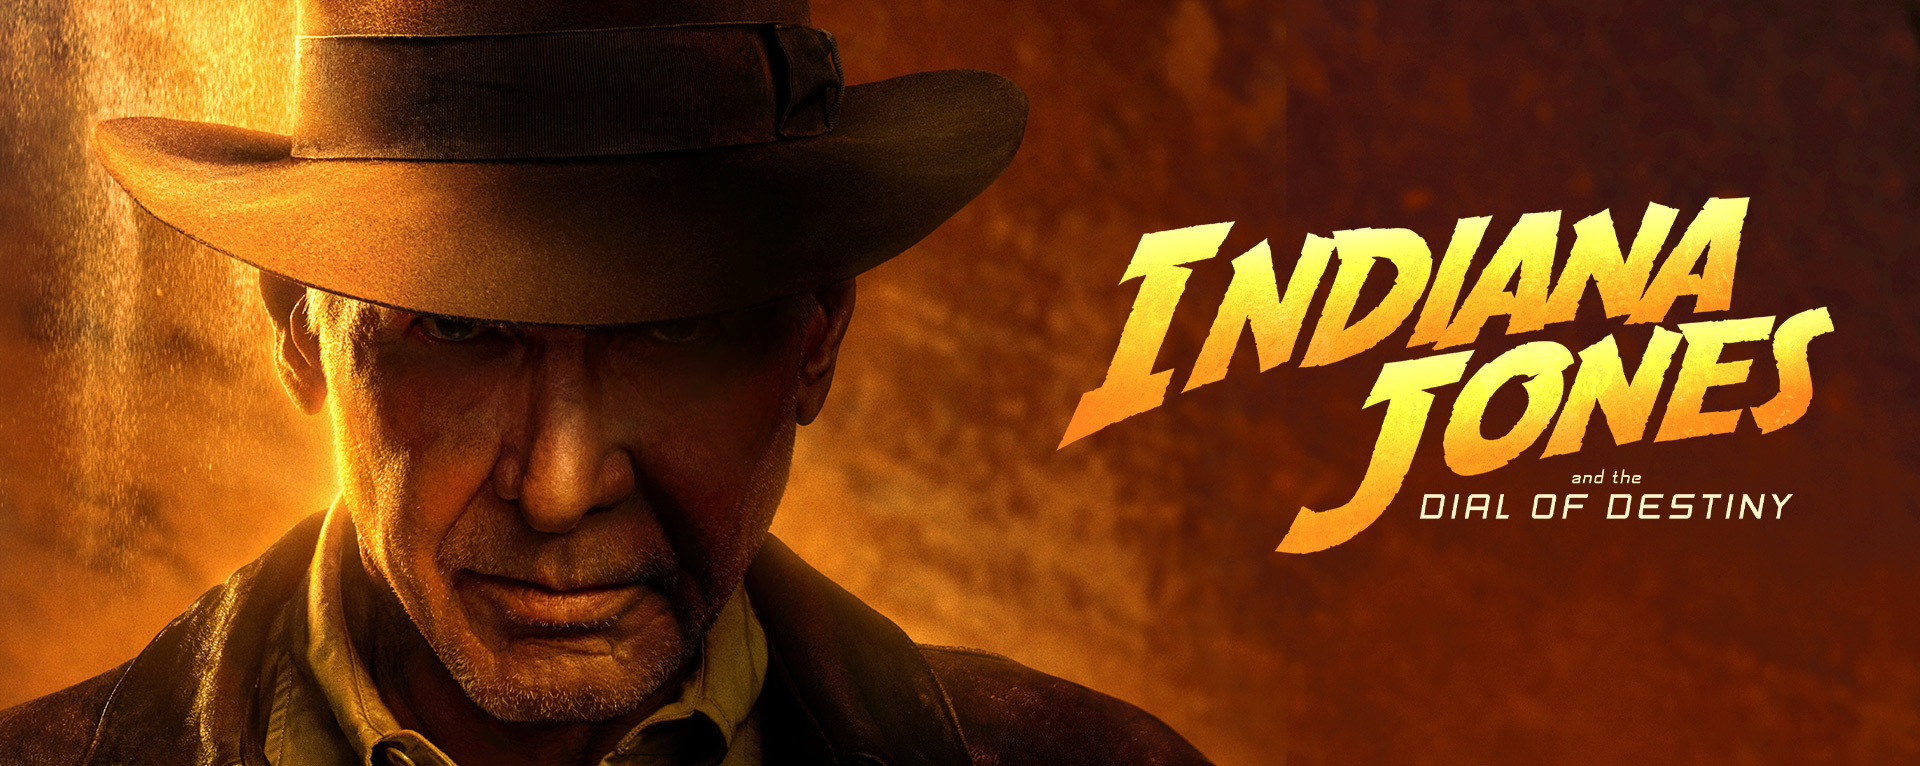 Official Trailer, Timeless Heroes Indiana Jones & Harrison Ford